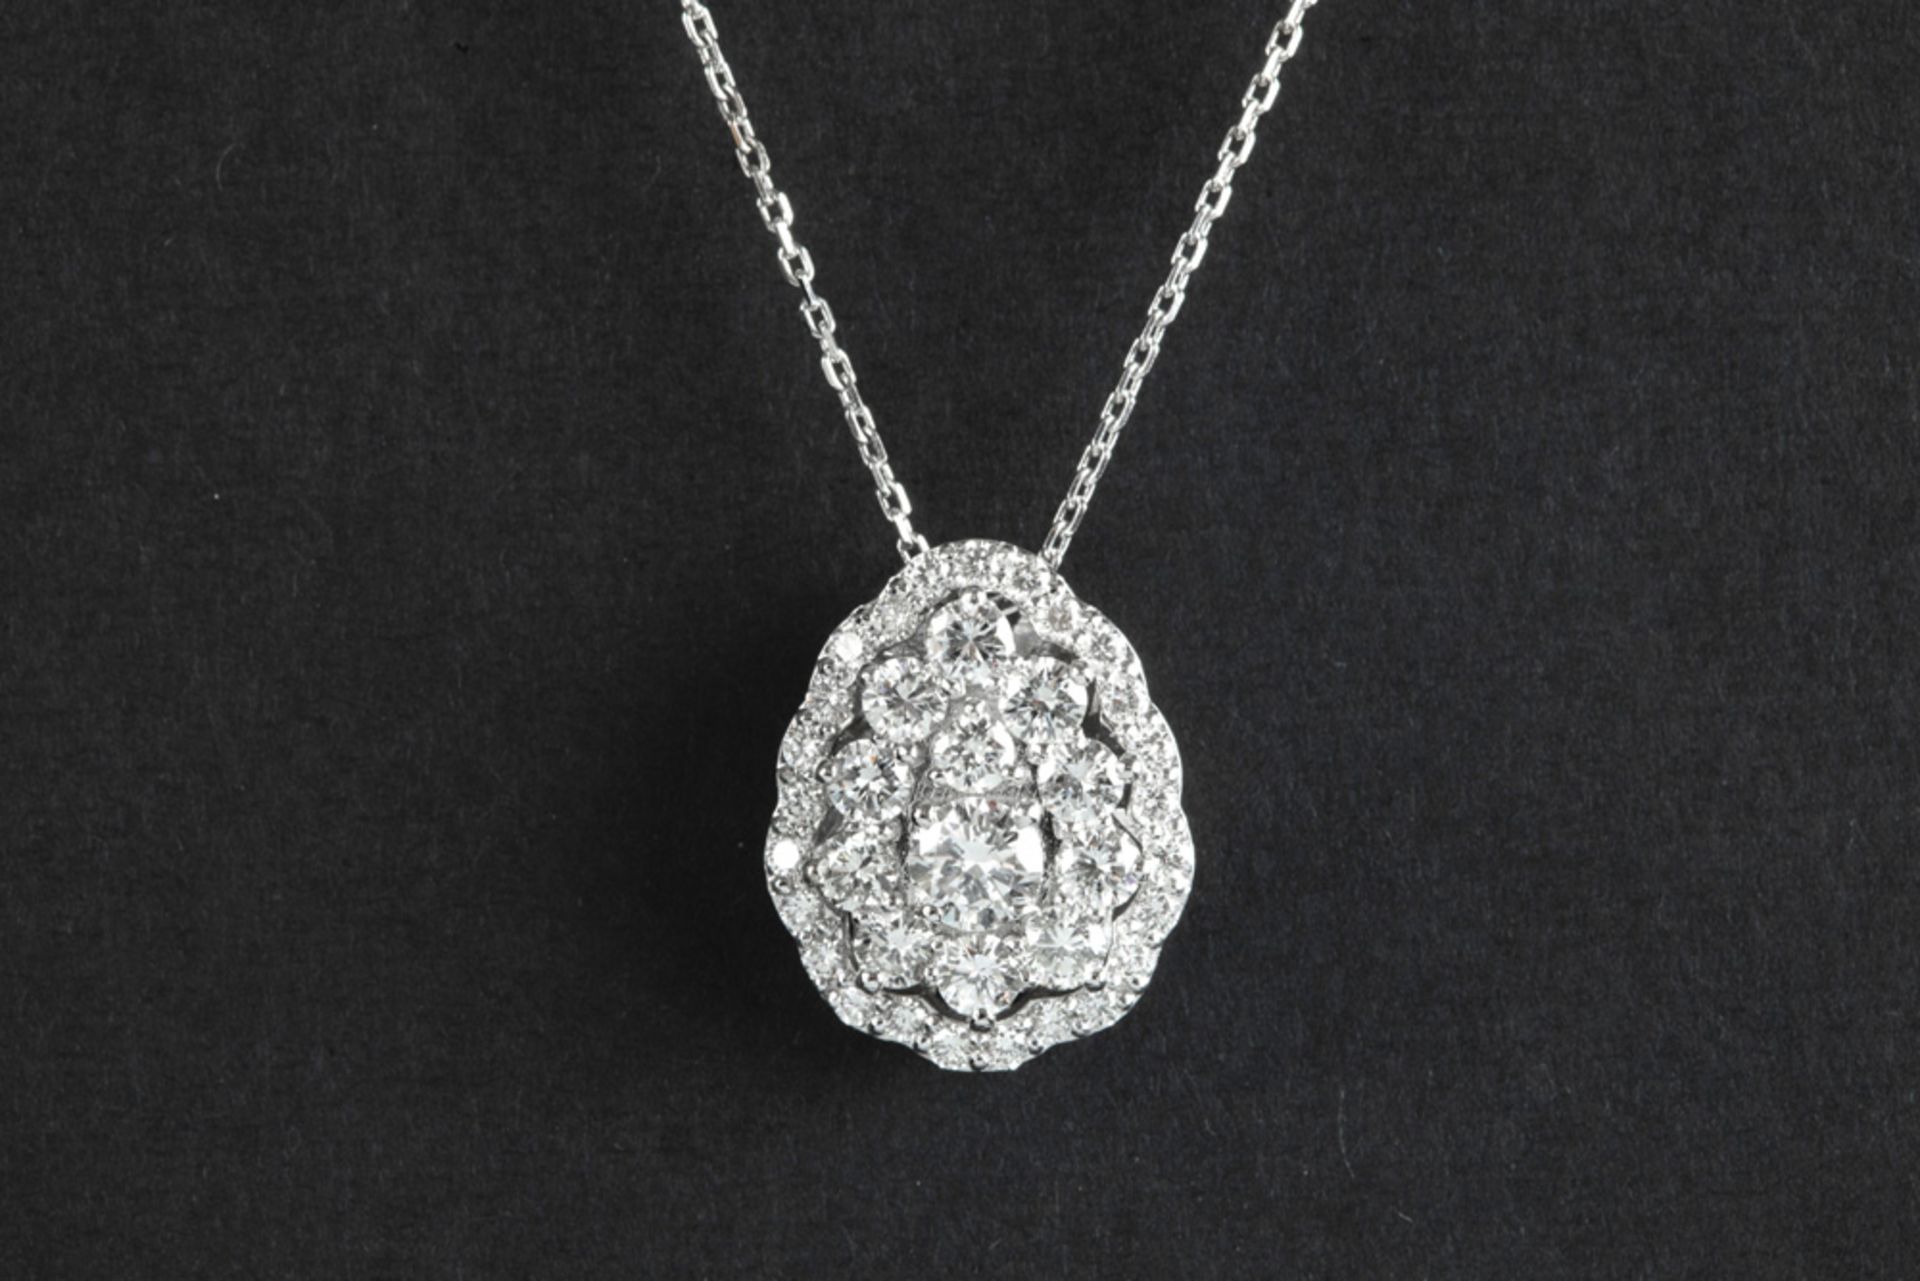 nice pearshaped pendant in white gold (18 carat) with ca 1,30 carat of high quality brilliant cut